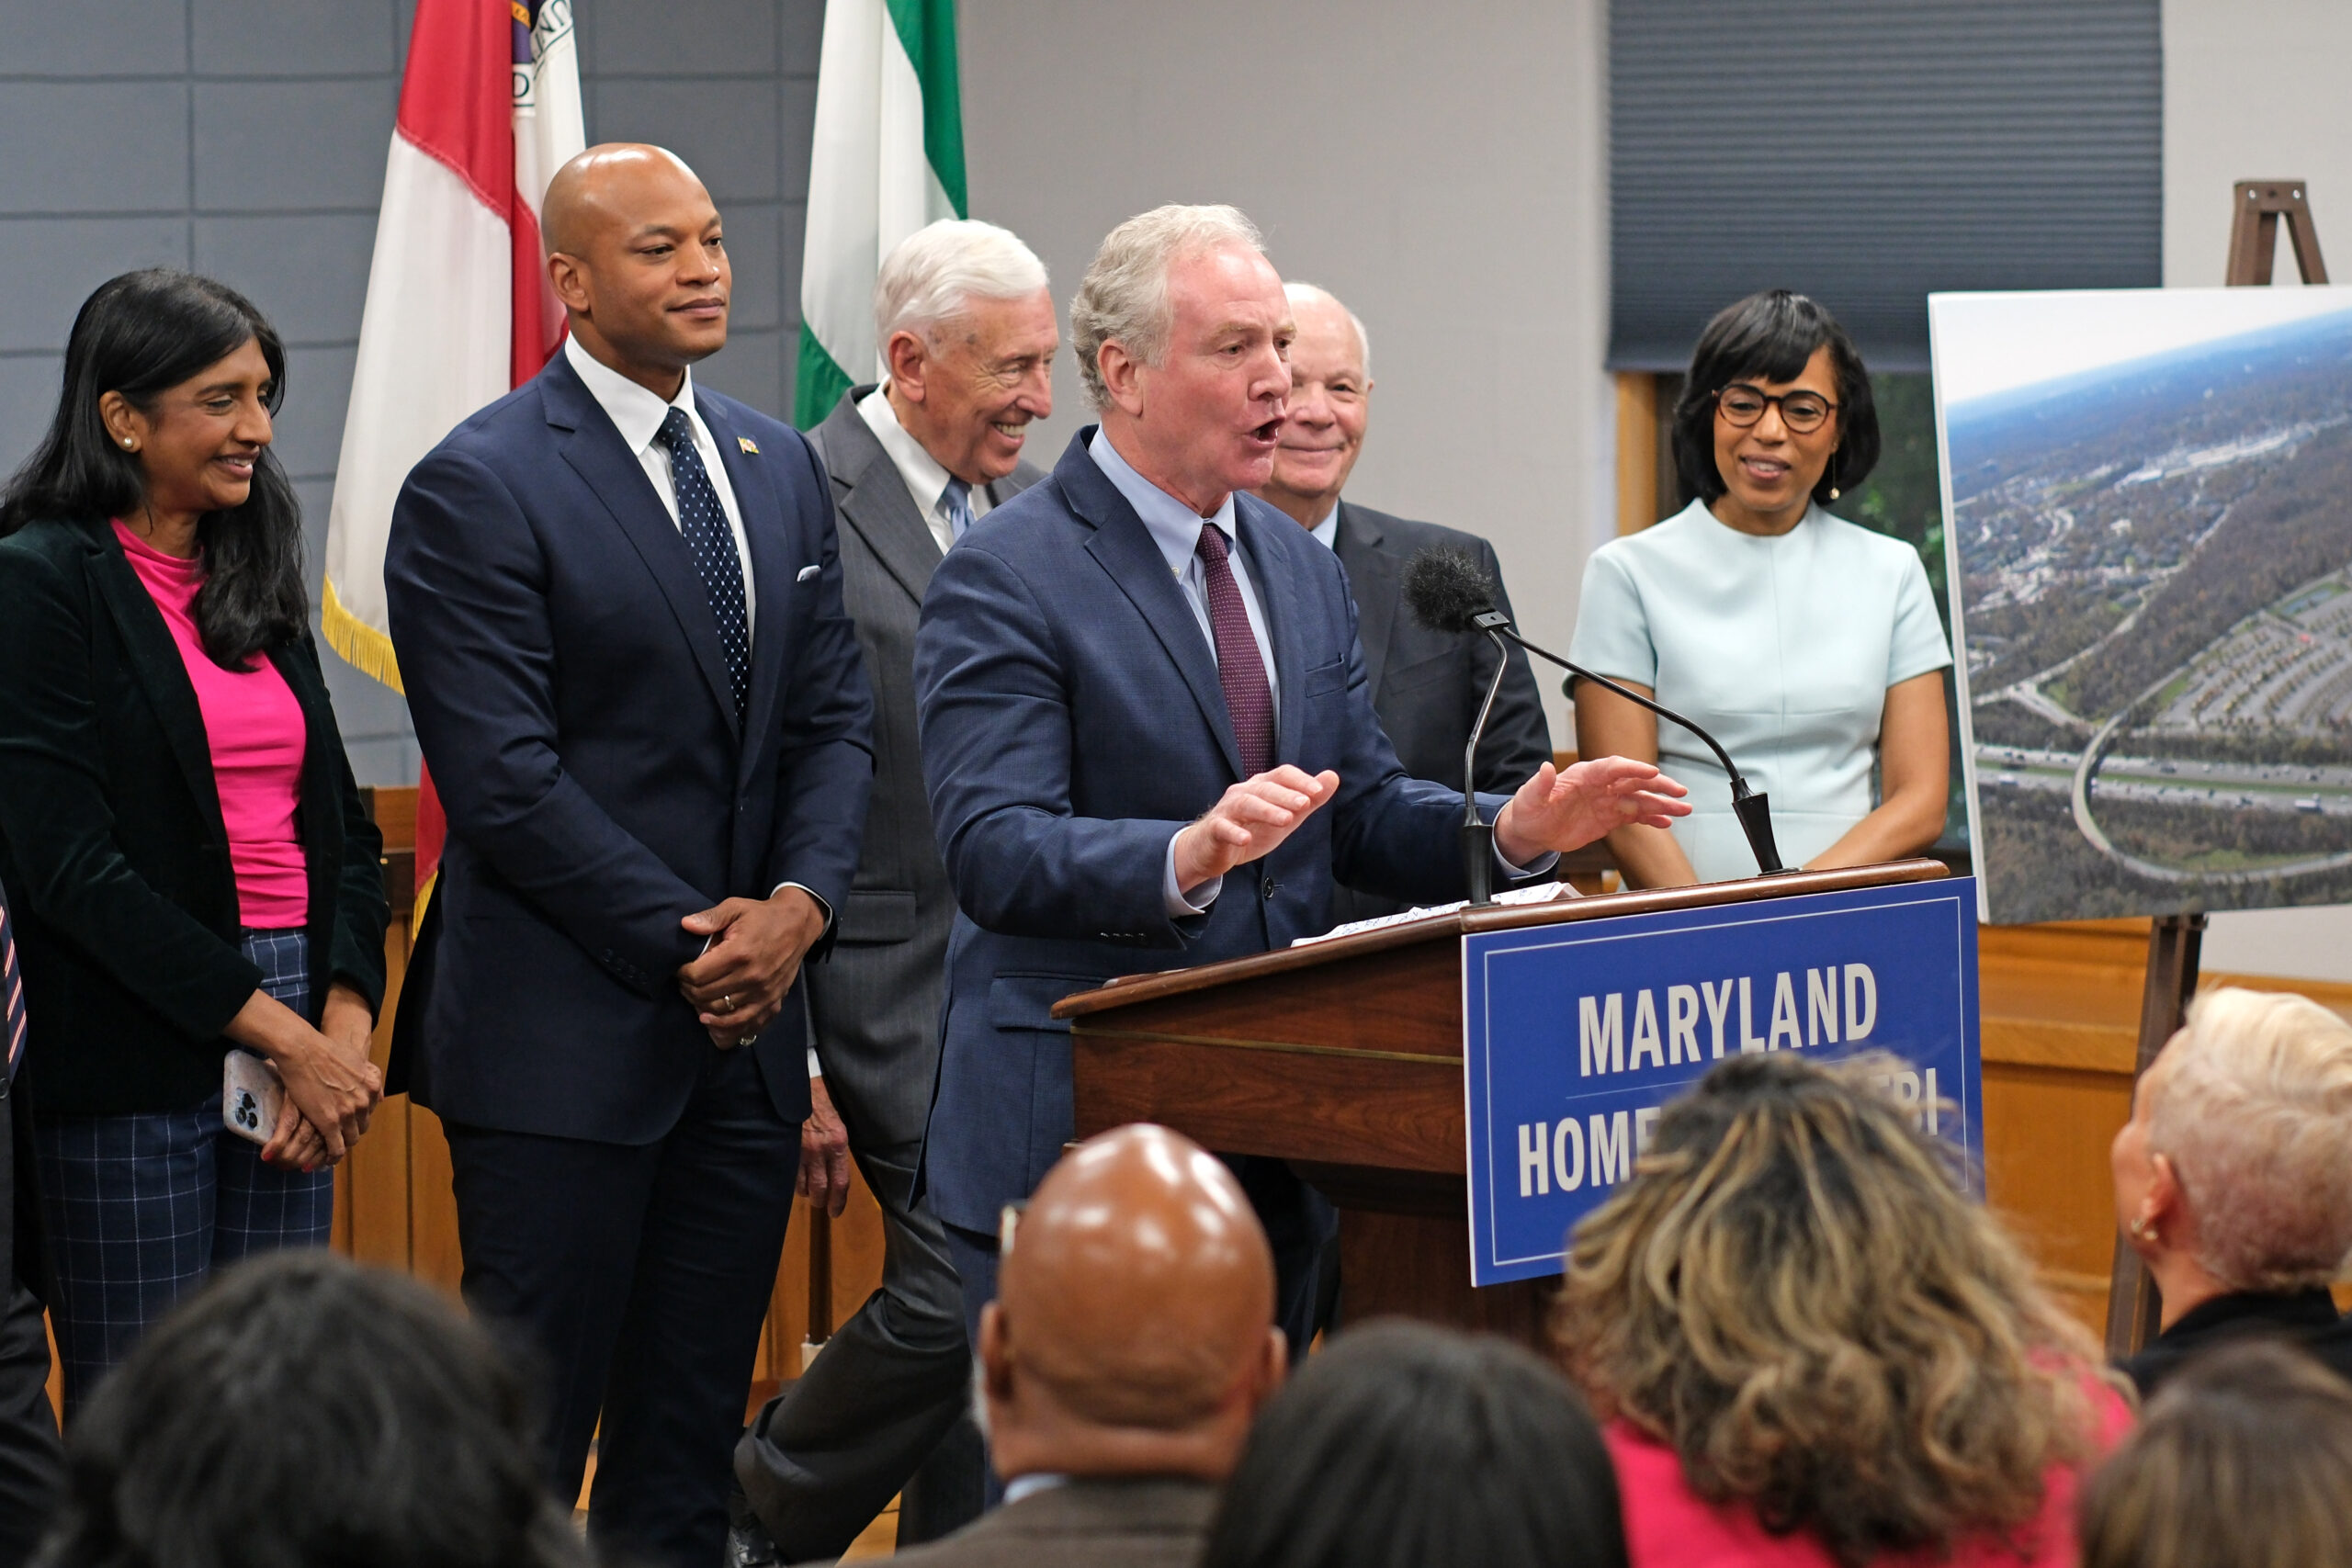 U.S. Sen. Chris Van Hollen, D-Maryland, defends the federal government's choice of Greenbelt, Maryland, for a new FBI headquarters on Friday, Nov. 10, 2023. He's joined by Maryland leaders (from left) Lt. Gov. Aruna Miller, Gov. Wes Moore, U.S. Rep. Steny Hoyer, U.S. Sen. Ben Cardin and Prince George's County Executive Angela Alsobrooks. (Capital News Service/Tommy Tucker)